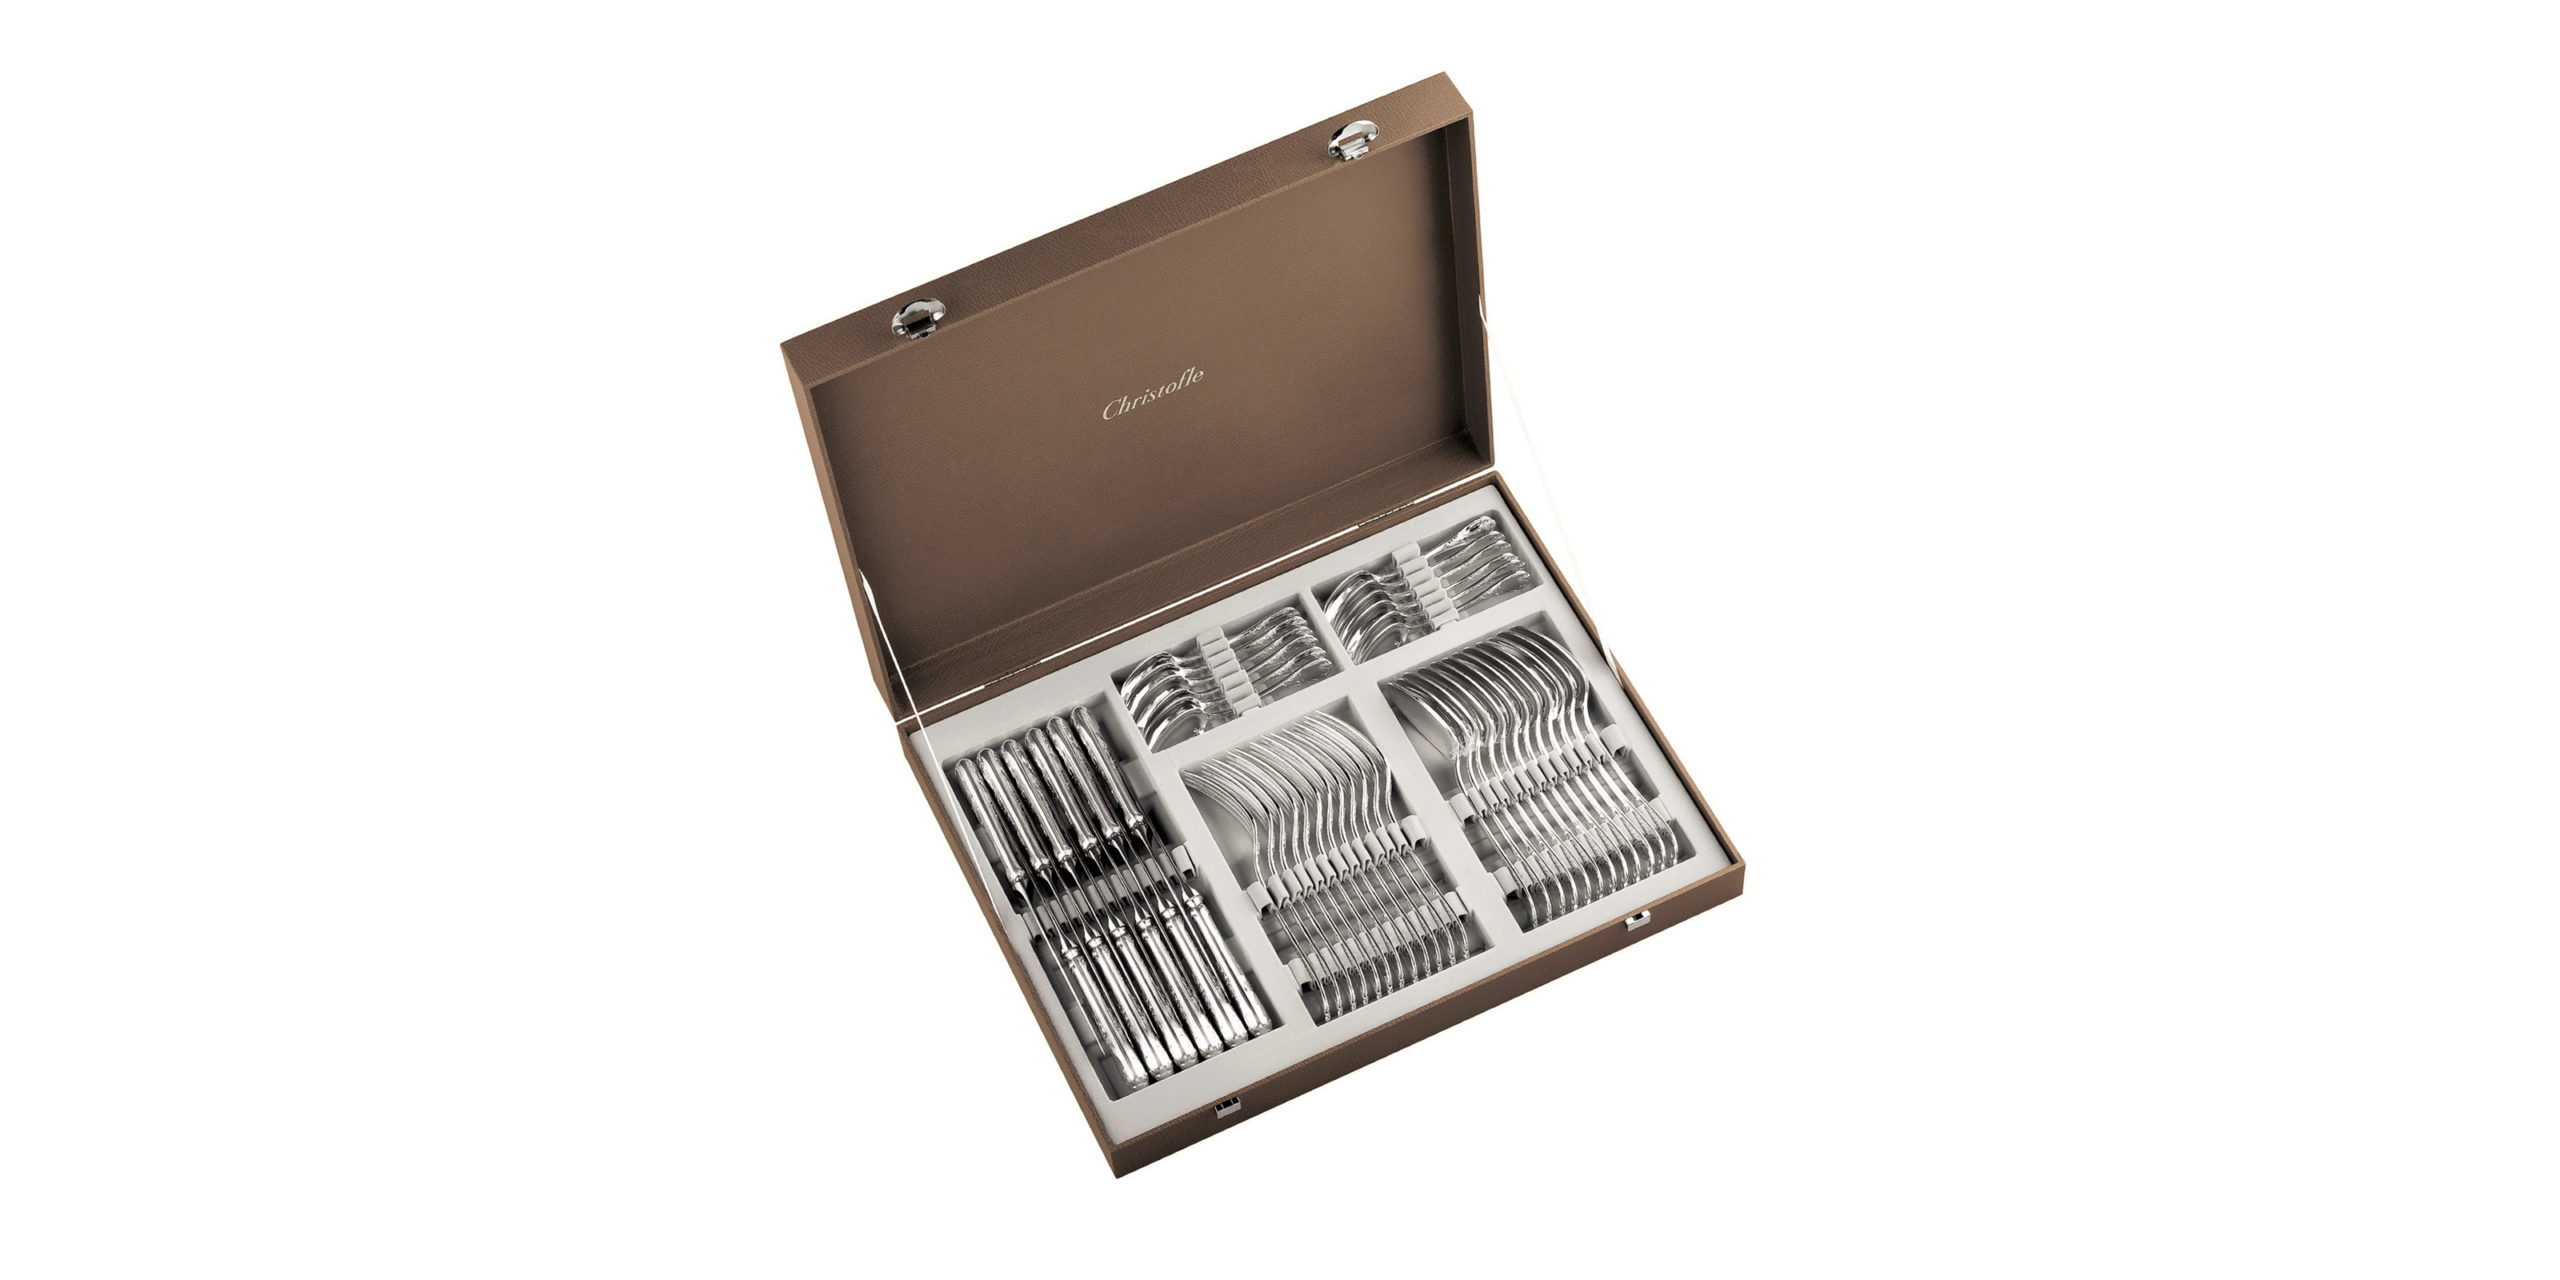 Christofle - 48-Piece Silver-Plated Flatware Set with Chest - Perles